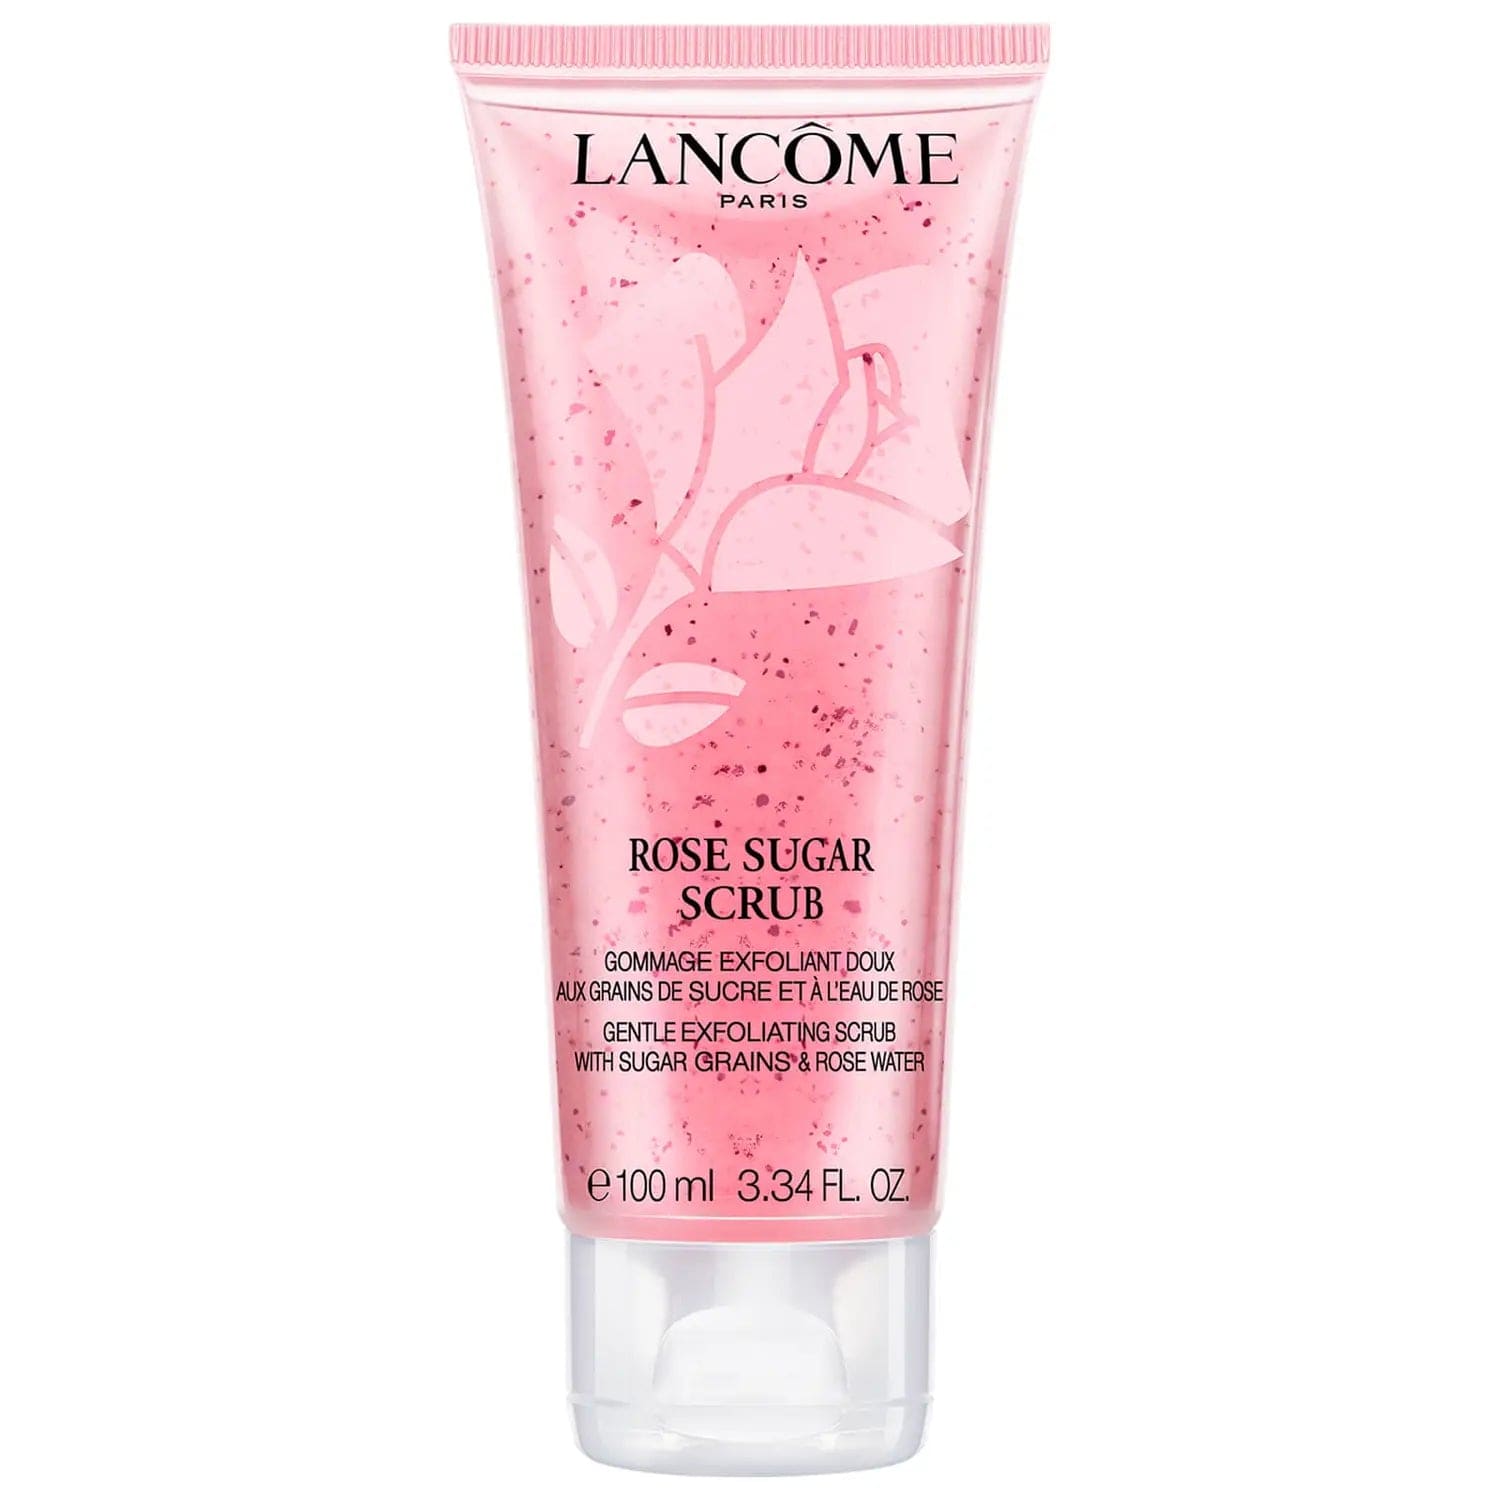 Lancôme: Free gift with Purchase (Step Up Gift)